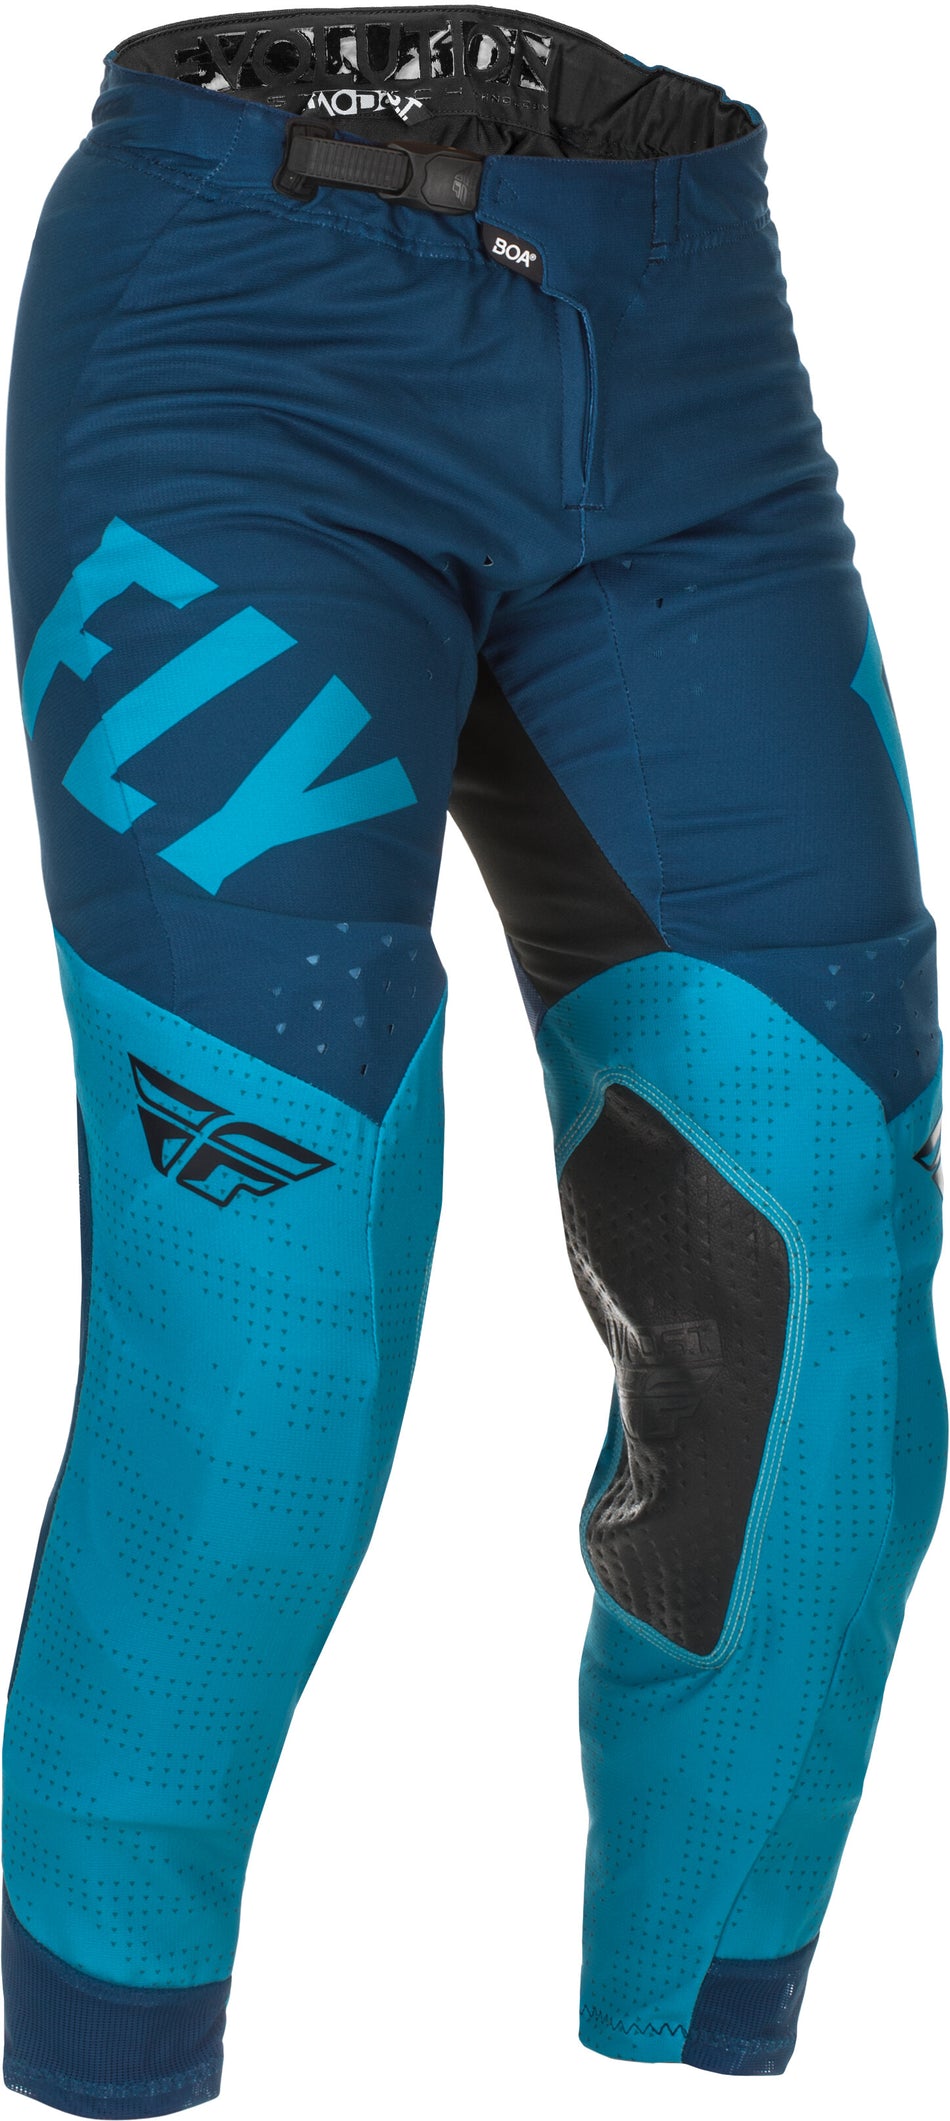 FLY RACING Evolution Dst Pants Blue/Navy Sz 36 374-13136